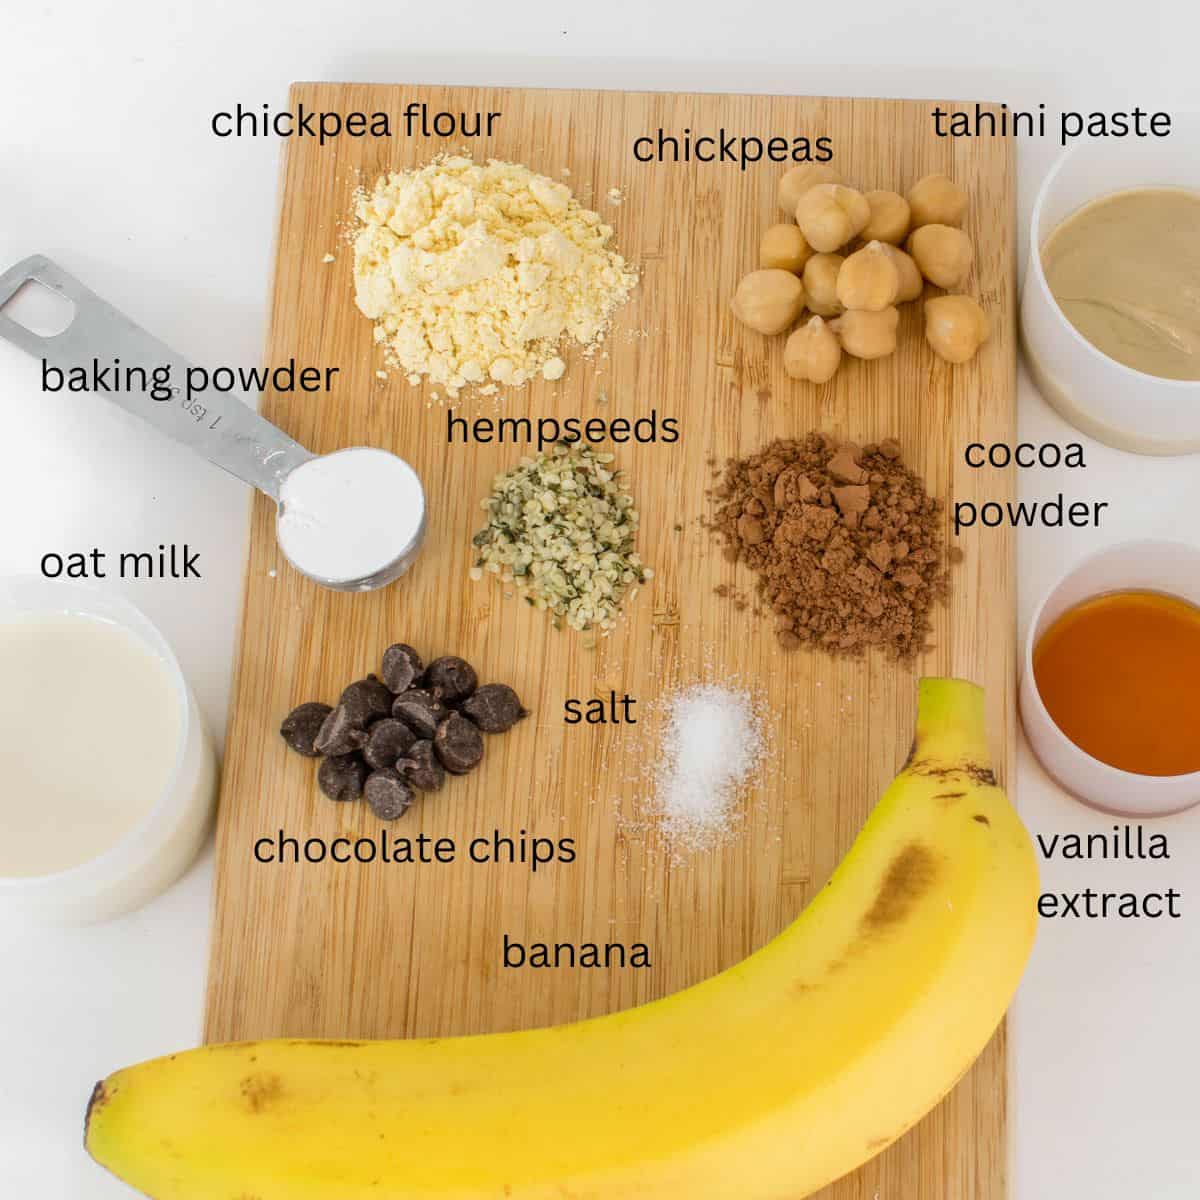 top view of all the ingredients on a wooden board.